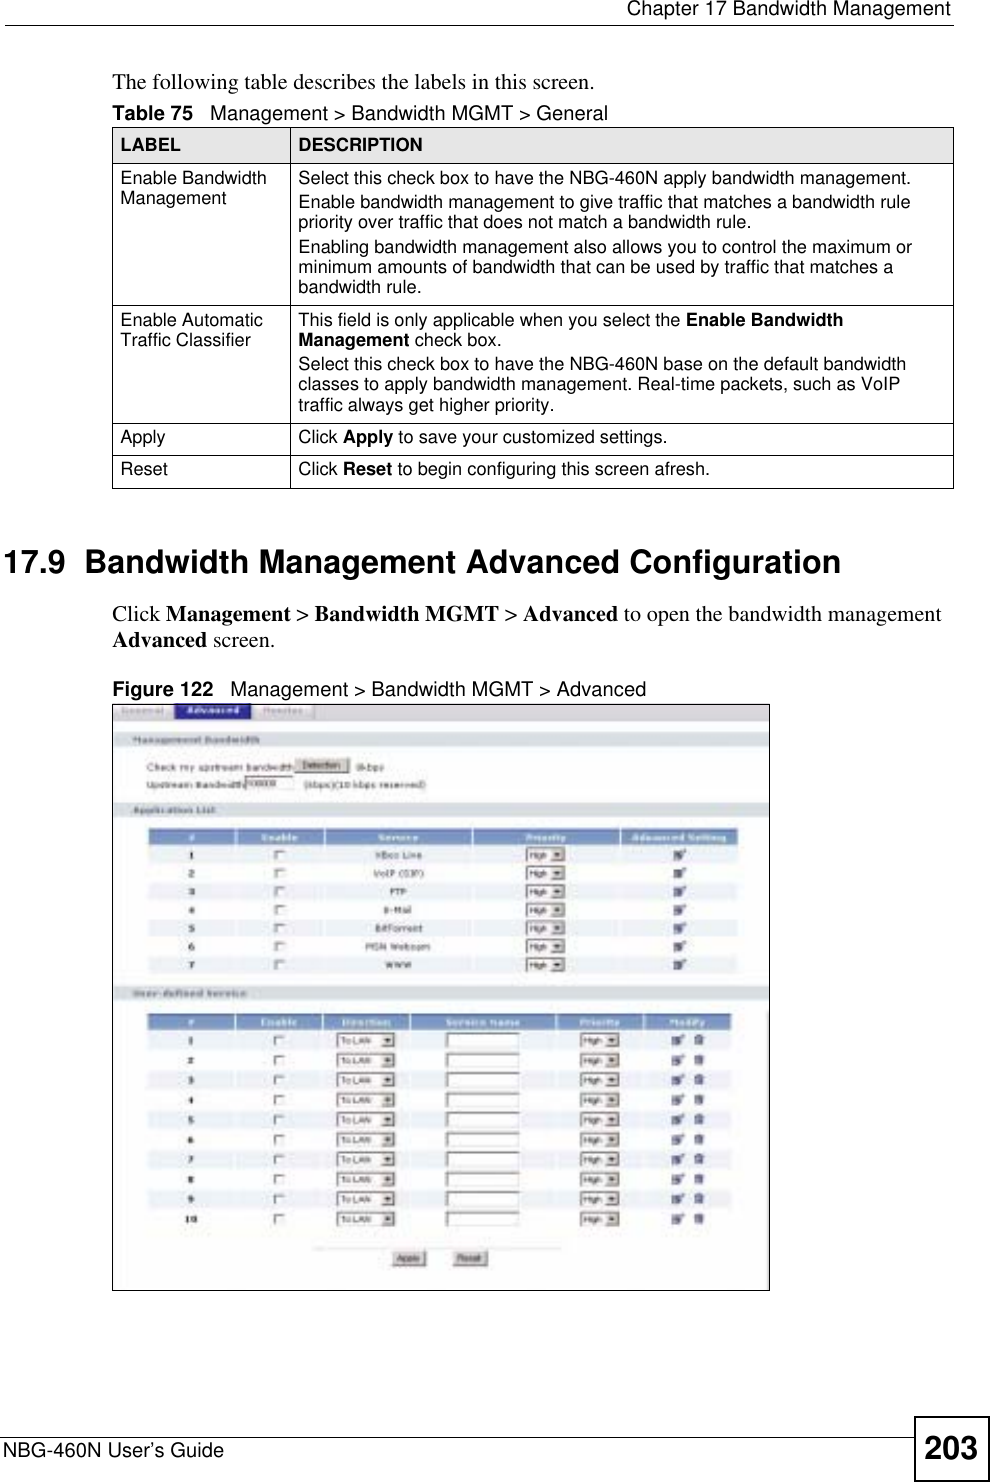  Chapter 17 Bandwidth ManagementNBG-460N User’s Guide 203The following table describes the labels in this screen.17.9  Bandwidth Management Advanced Configuration Click Management &gt; Bandwidth MGMT &gt; Advanced to open the bandwidth management Advanced screen.Figure 122   Management &gt; Bandwidth MGMT &gt; Advanced Table 75   Management &gt; Bandwidth MGMT &gt; GeneralLABEL DESCRIPTIONEnable Bandwidth Management  Select this check box to have the NBG-460N apply bandwidth management. Enable bandwidth management to give traffic that matches a bandwidth rule priority over traffic that does not match a bandwidth rule. Enabling bandwidth management also allows you to control the maximum or minimum amounts of bandwidth that can be used by traffic that matches a bandwidth rule. Enable Automatic Traffic Classifier  This field is only applicable when you select the Enable Bandwidth Management check box.Select this check box to have the NBG-460N base on the default bandwidth classes to apply bandwidth management. Real-time packets, such as VoIP traffic always get higher priority.Apply Click Apply to save your customized settings.Reset Click Reset to begin configuring this screen afresh.